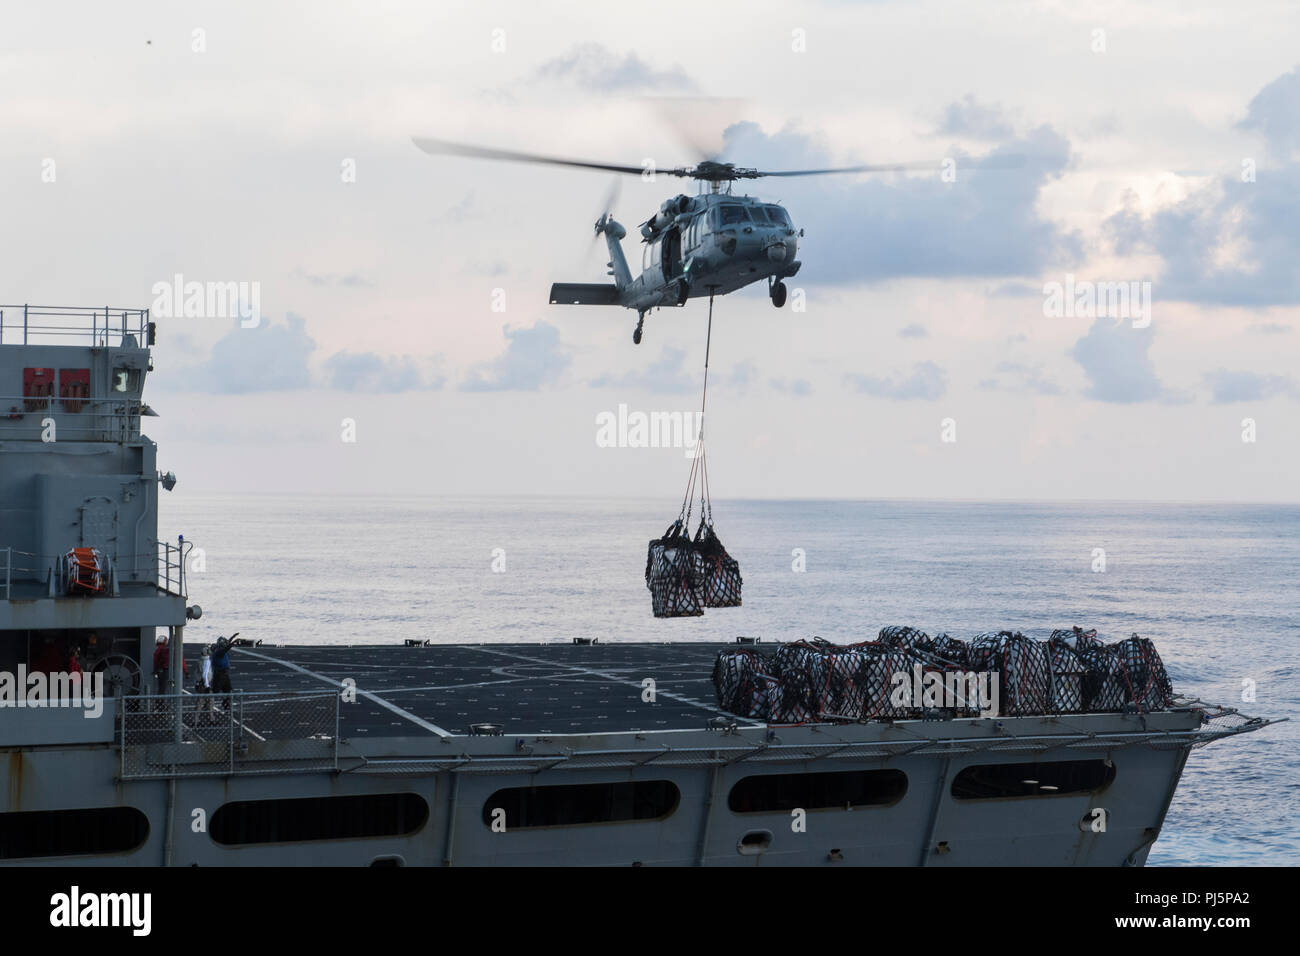 180824-N-TT202-076  ATLANTIC OCEAN (Aug. 24, 2018) An MH-60S Sea Hawk from the Dusty Dogs of Helicopter Sea Combat Squadron (HSC) 7 transports cargo from the fast combat support ship USNS Arctic (T-AOE 8) to the Nimitz-class aircraft carrier USS Abraham Lincoln (CVN 72) during a replenishment-at-sea. Abraham Lincoln is currently underway conducting carrier qualifications. (U.S. Navy photo by Mass Communication Specialist 3rd Class Daniel E. Gheesling/Released) Stock Photo